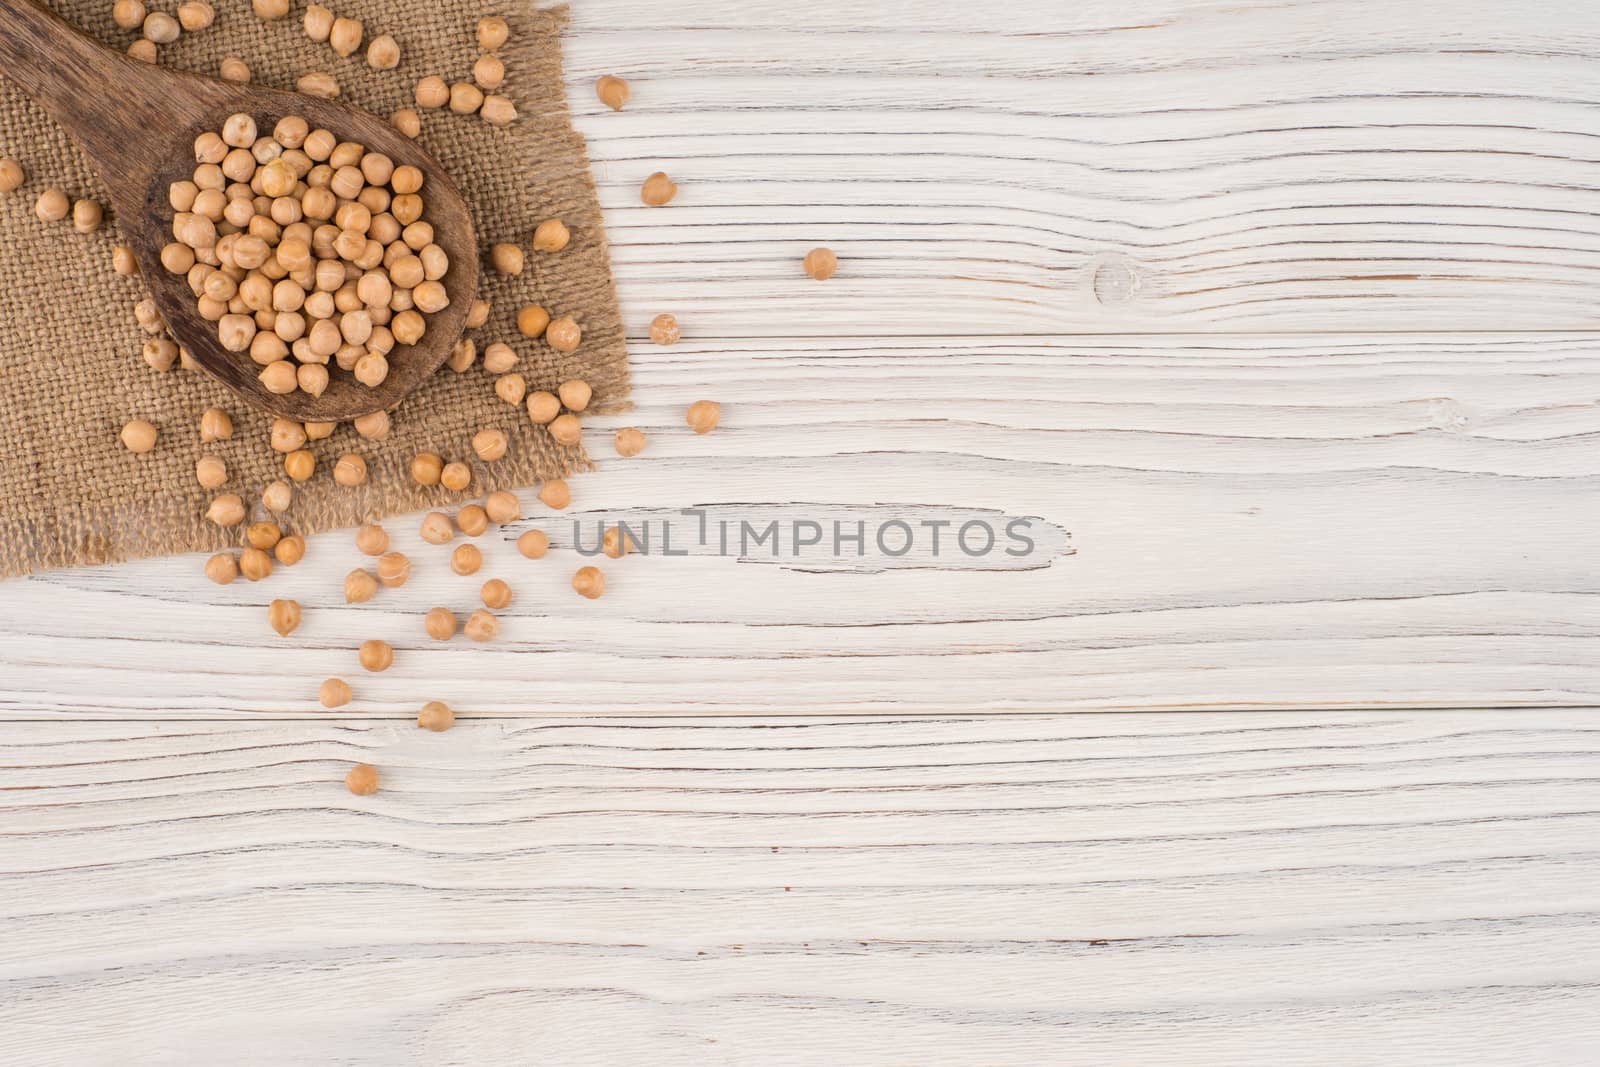 Chickpeas in a wooden spoon and an old white wooden table. by DGolbay